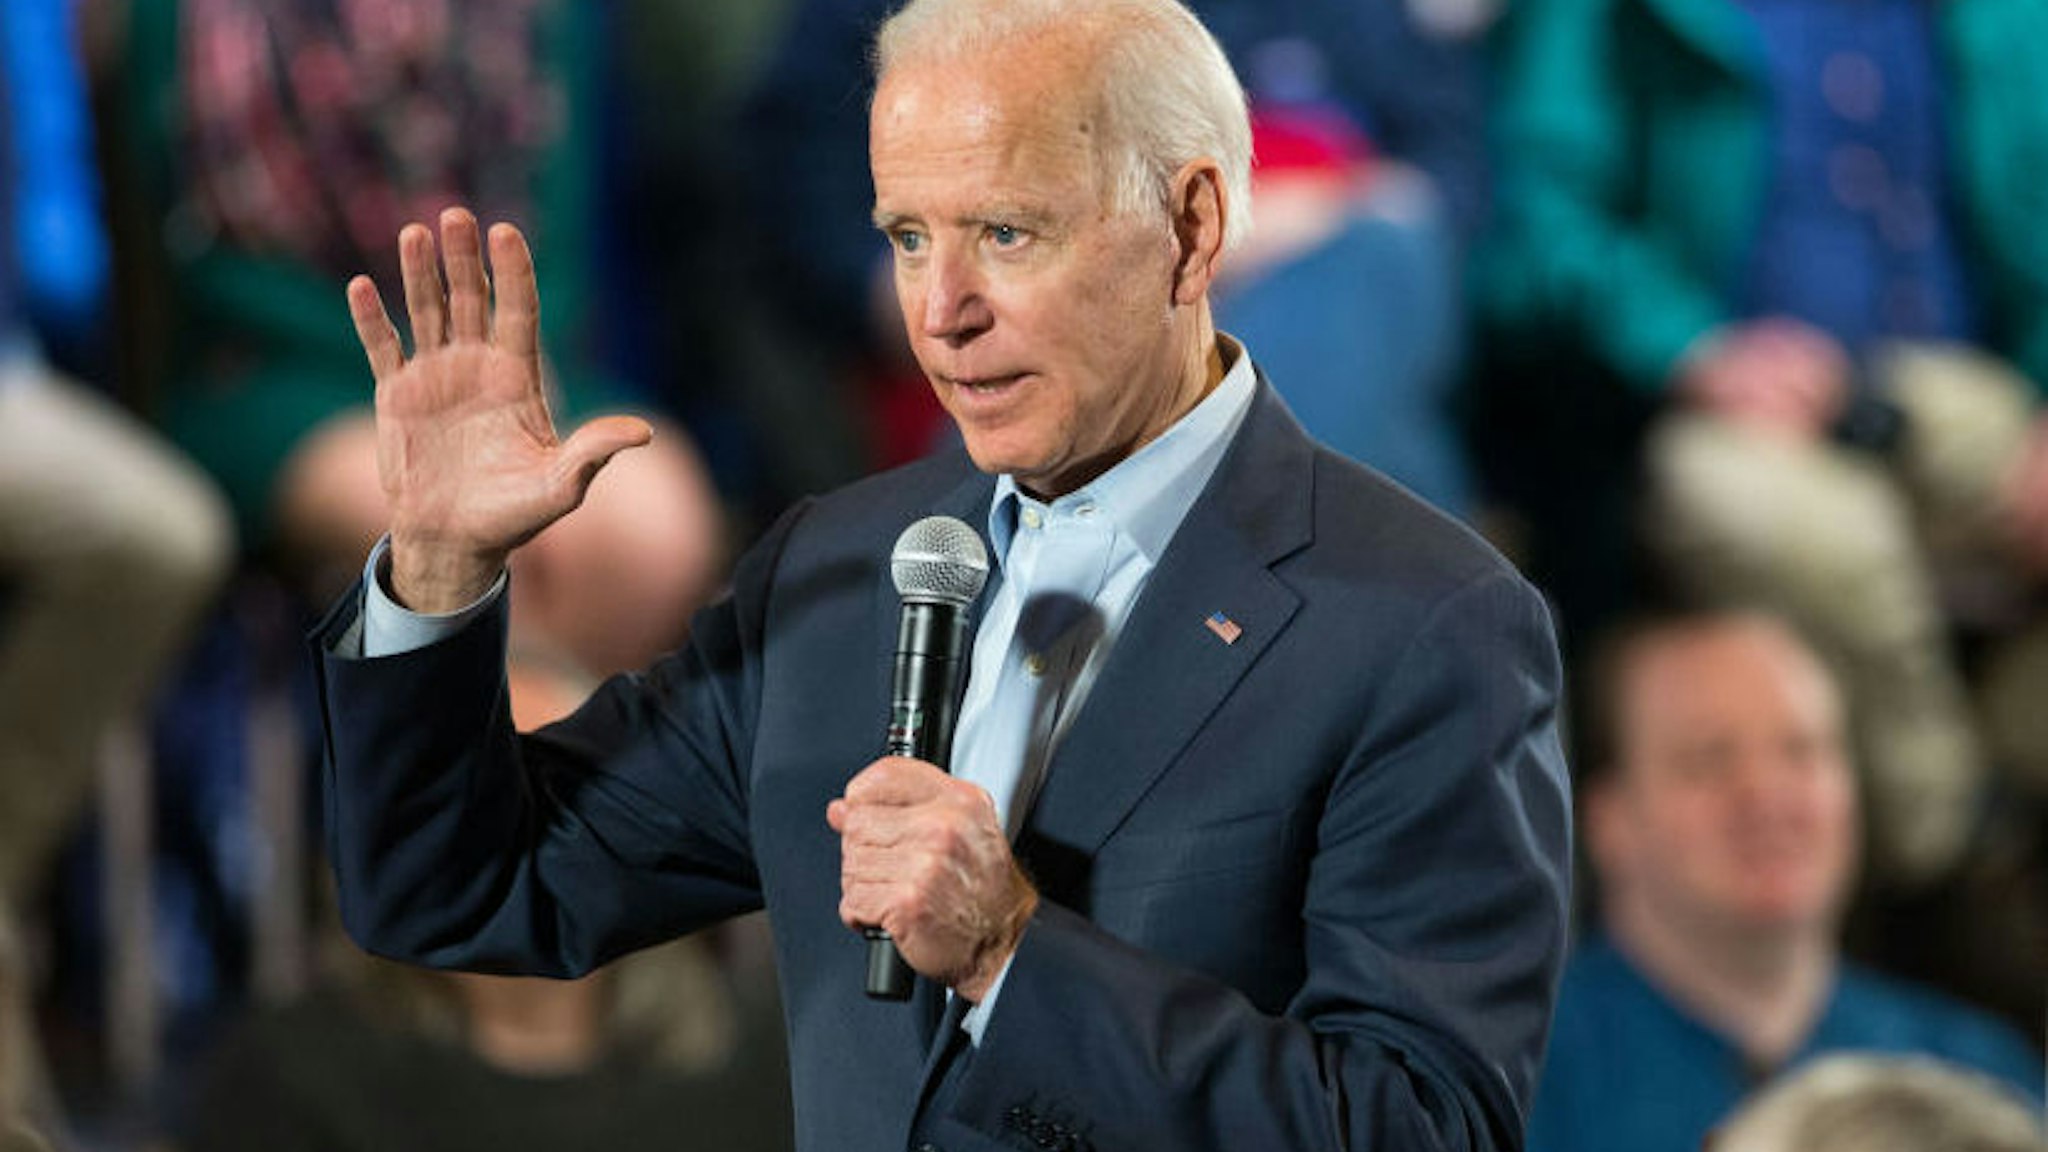 DERRY , NH - DECEMBER 30: Democratic presidential candidate, former Vice President Joe Biden speaks during a campaign Town Hall on December 30, 2019 in Derry, New Hampshire. The 2020 Iowa Democratic caucuses will take place on February 3, 2020, making it the first nominating contest for the Democratic Party in choosing their presidential candidate to face Donald Trump in the 2020 election.